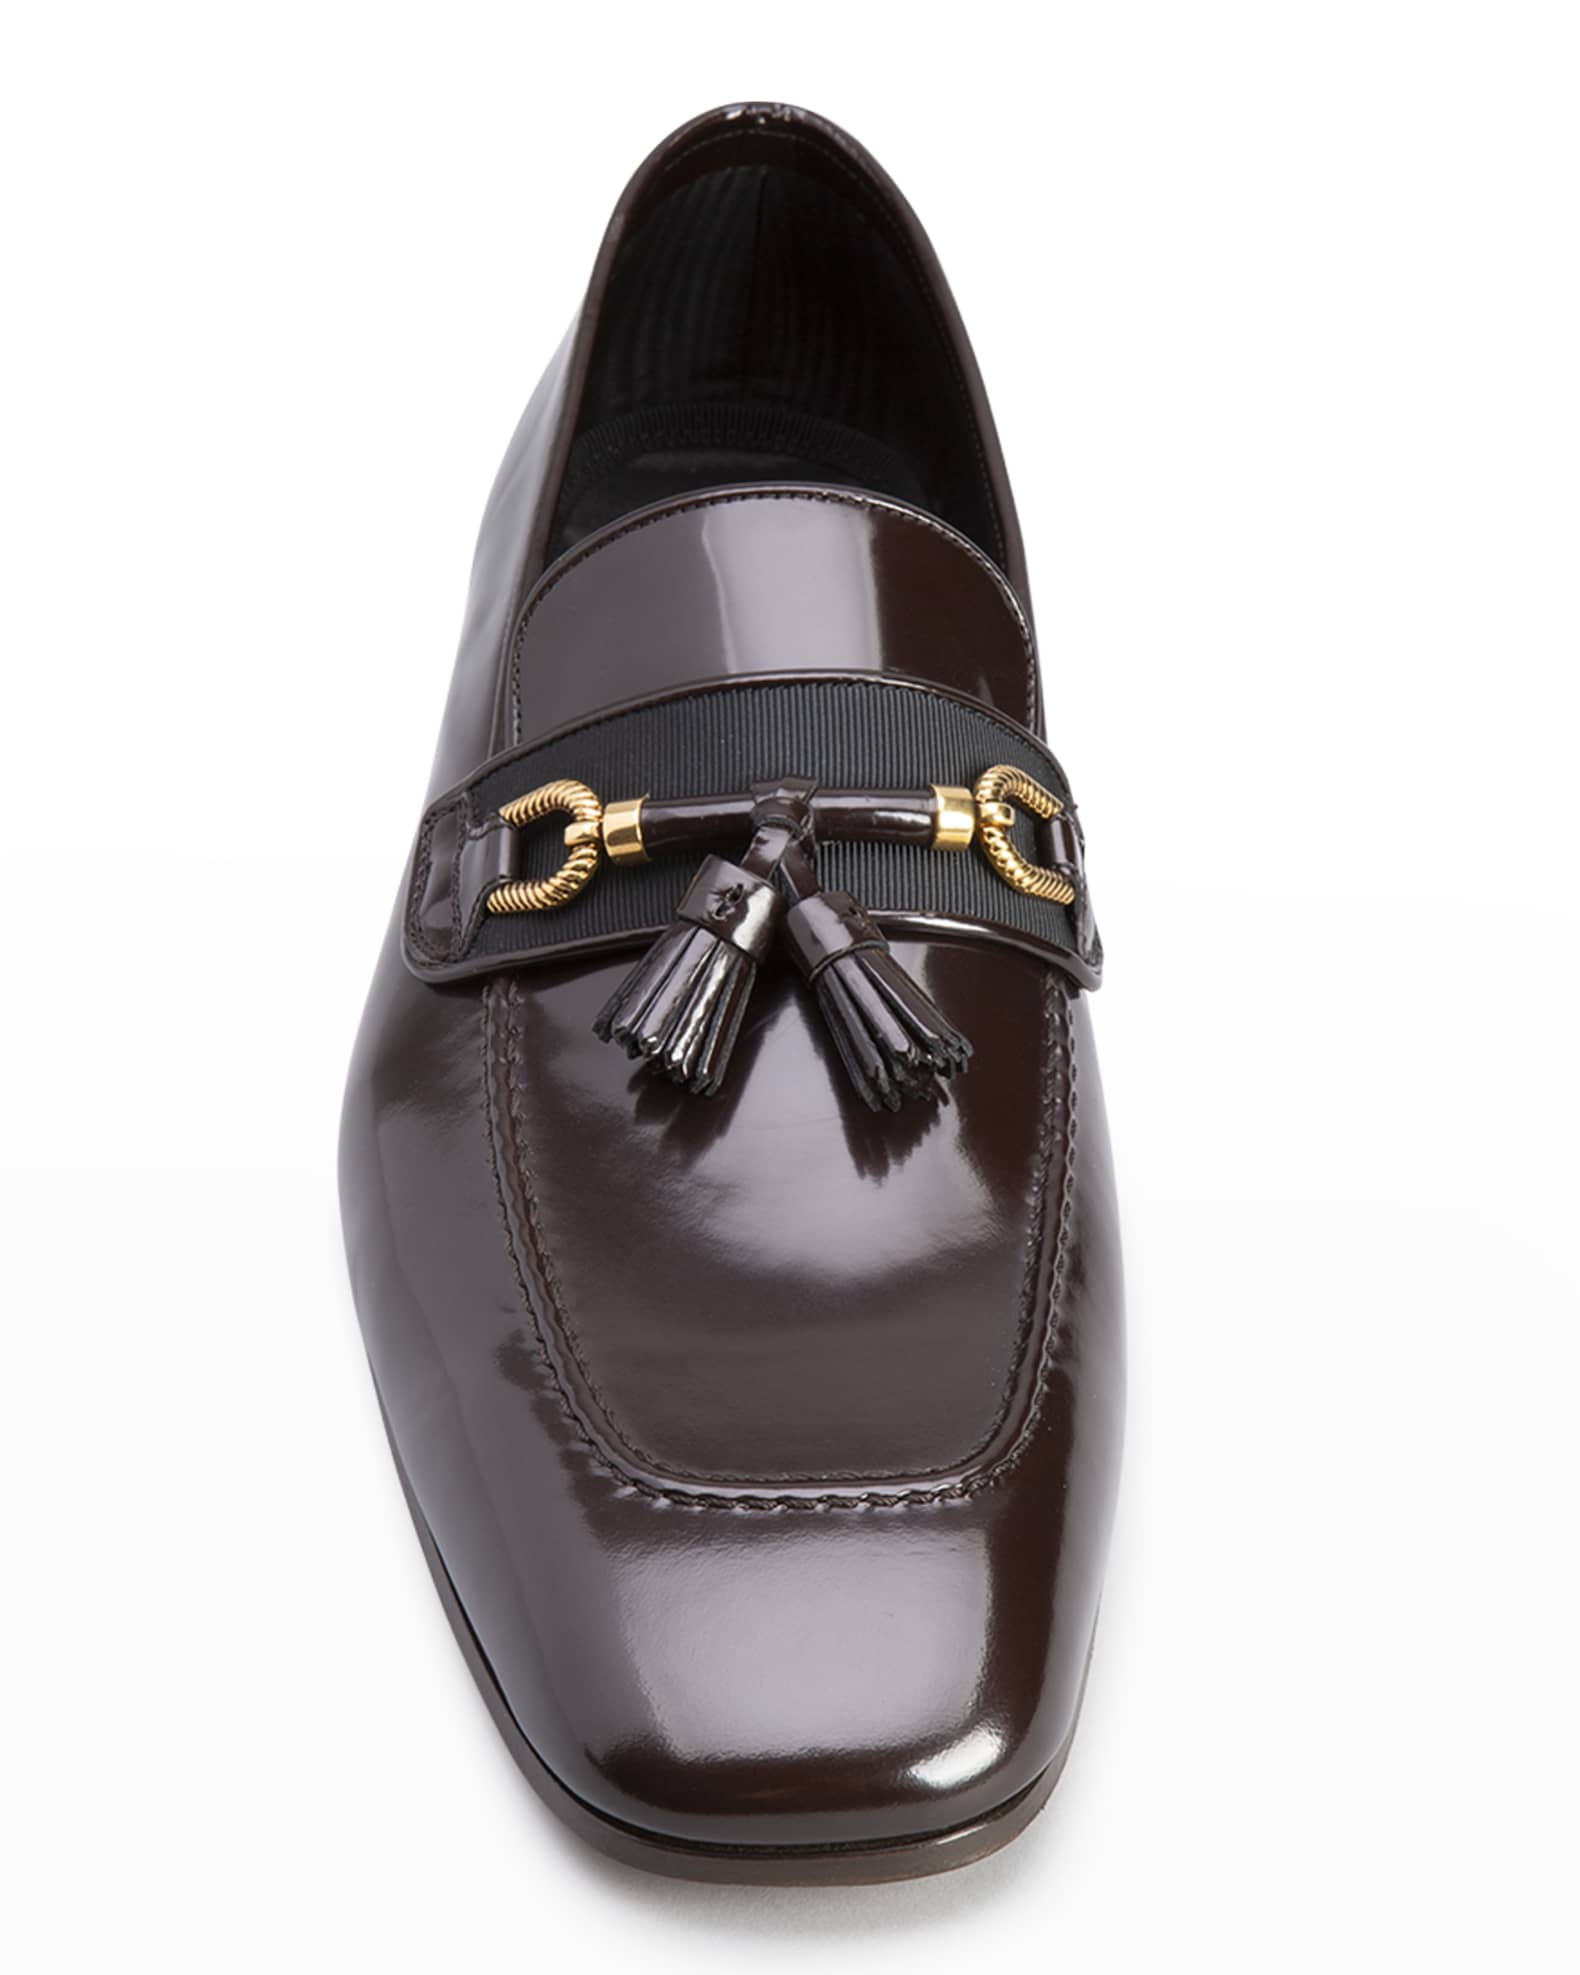 TOM FORD Men's Jack Patent Leather Horsebit Loafers | Neiman Marcus